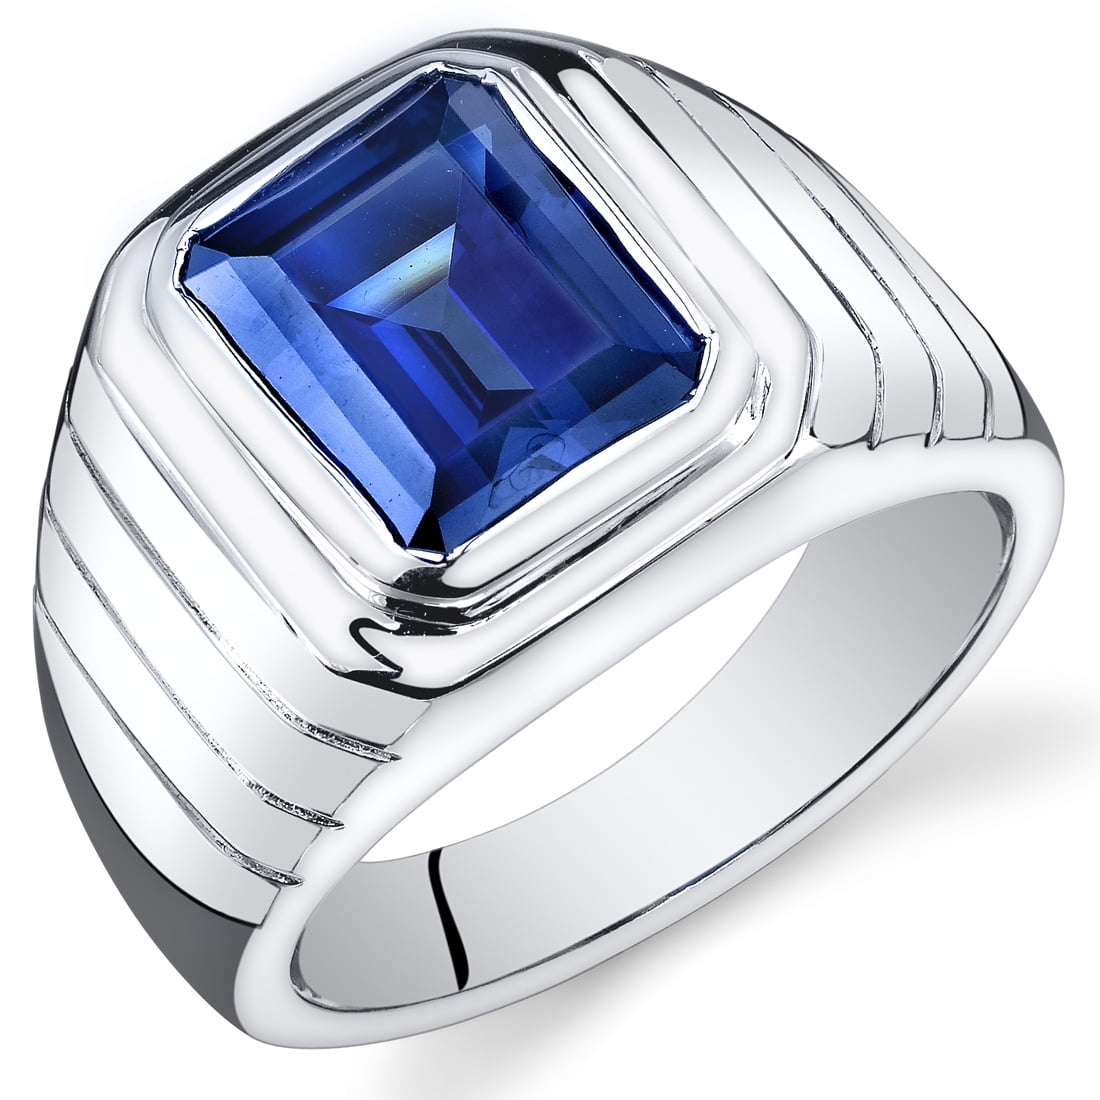 Mens sapphire ring oval 8 carat stainless steel cz cubic zirconia signet new 500 